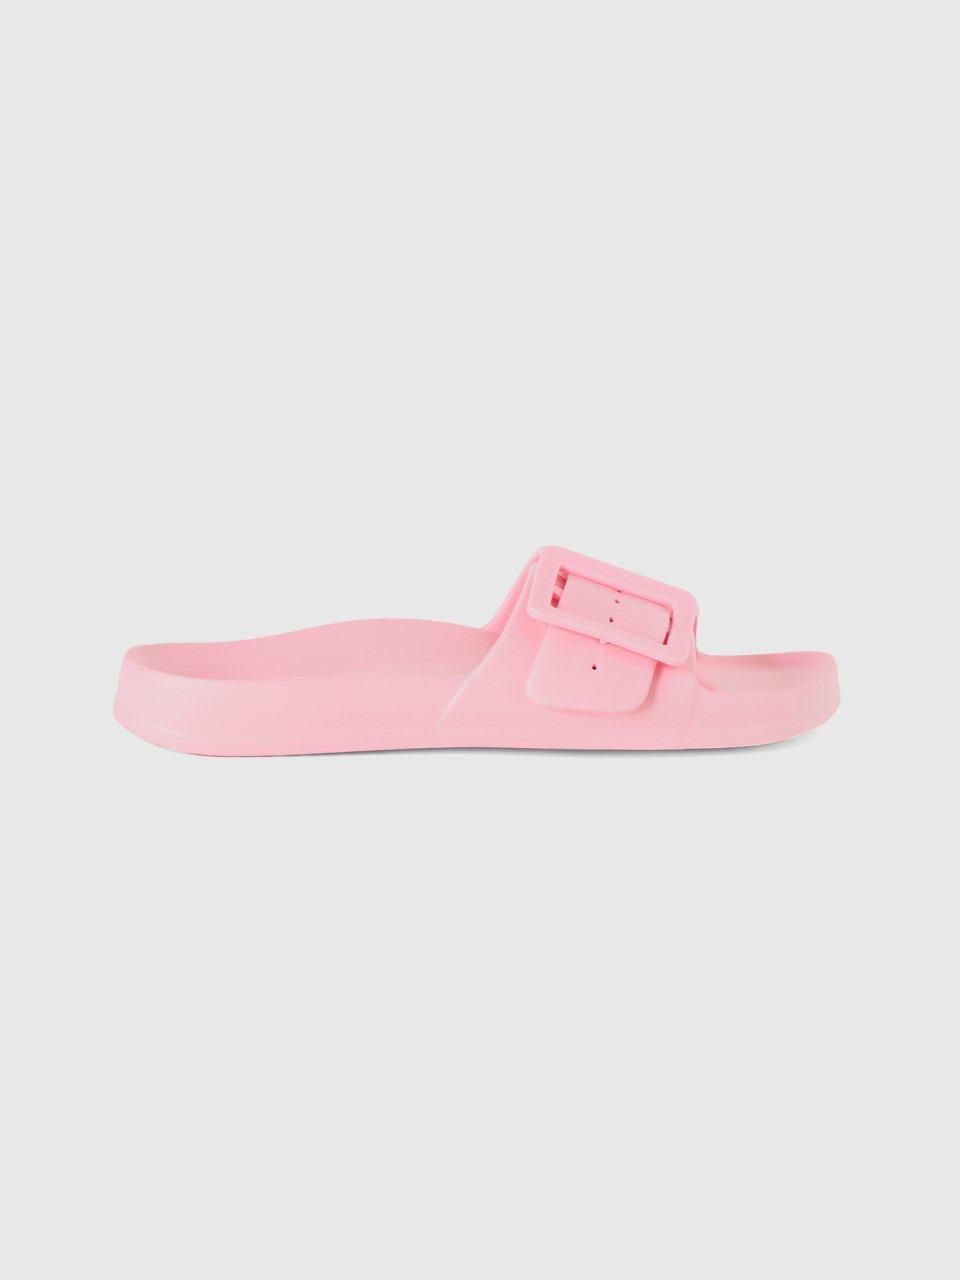 Benetton, Sandals With Band And Buckle,5, Pink